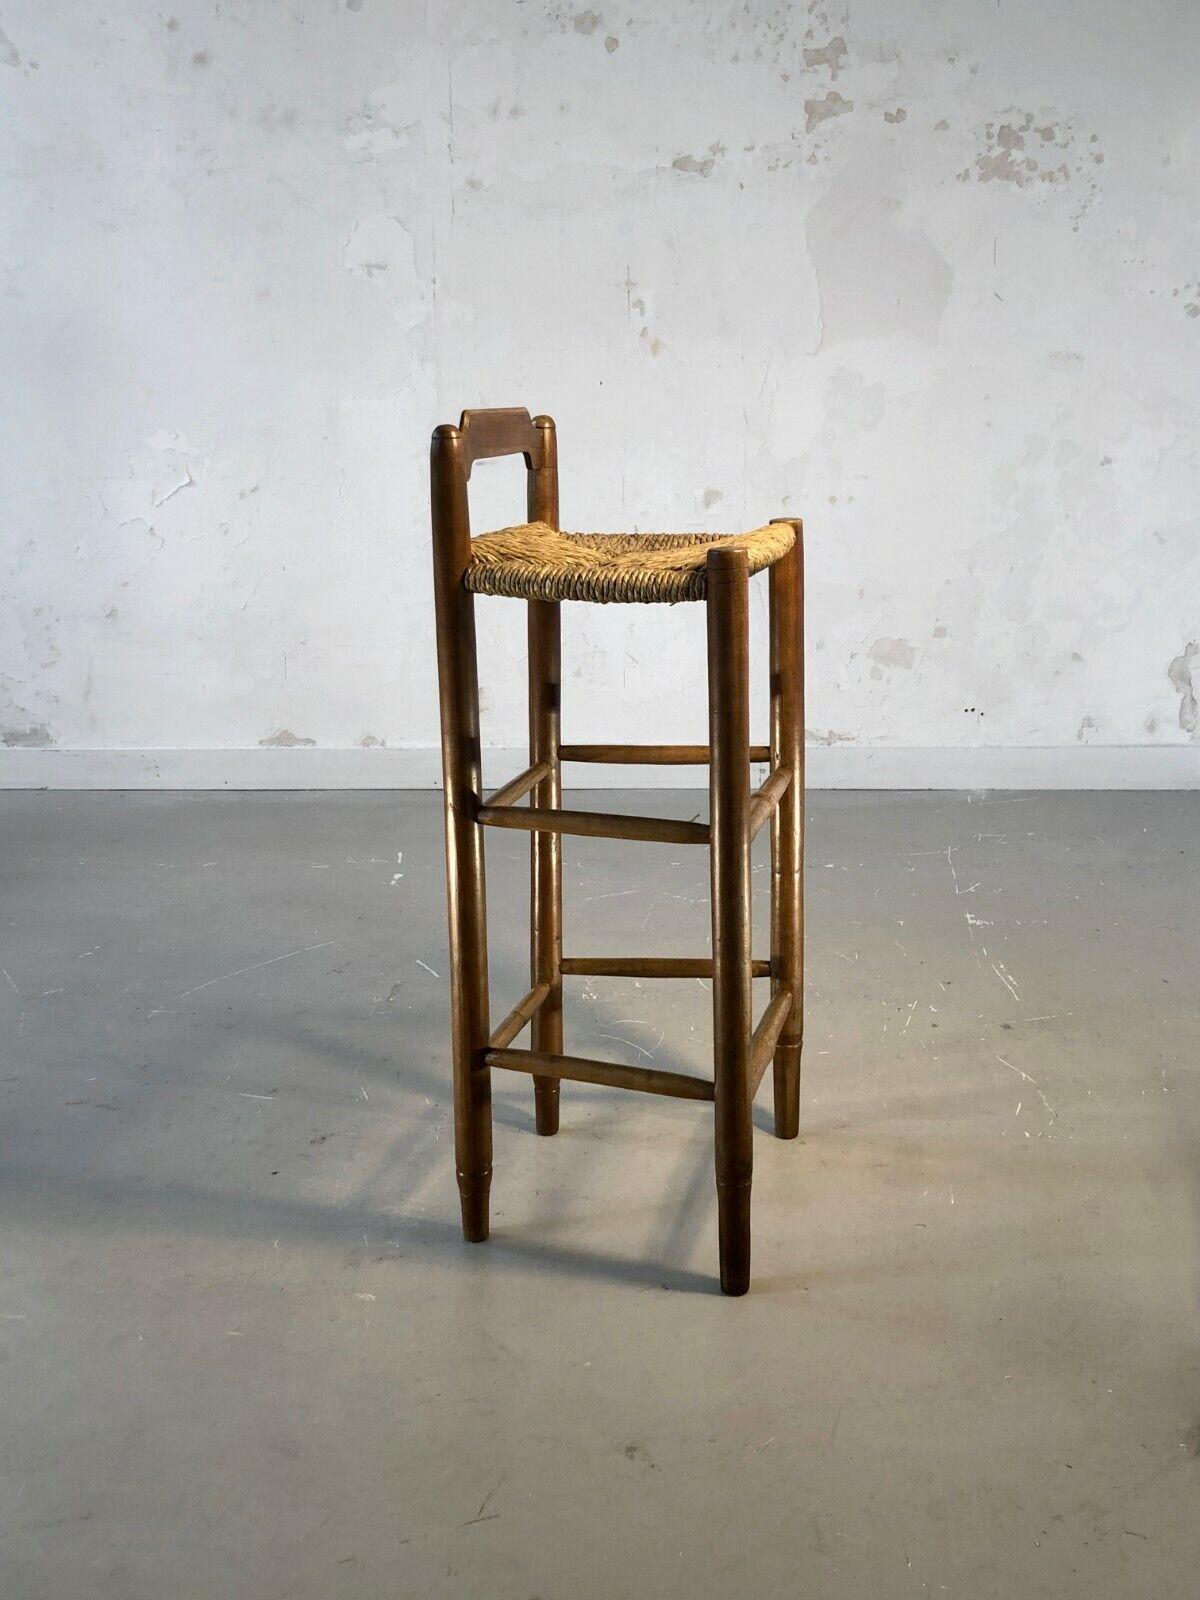 A BRUTALIST MID-CENTURY-MODERN RUSTIC BAR STOOL CHAIR, France 1950 For Sale 2